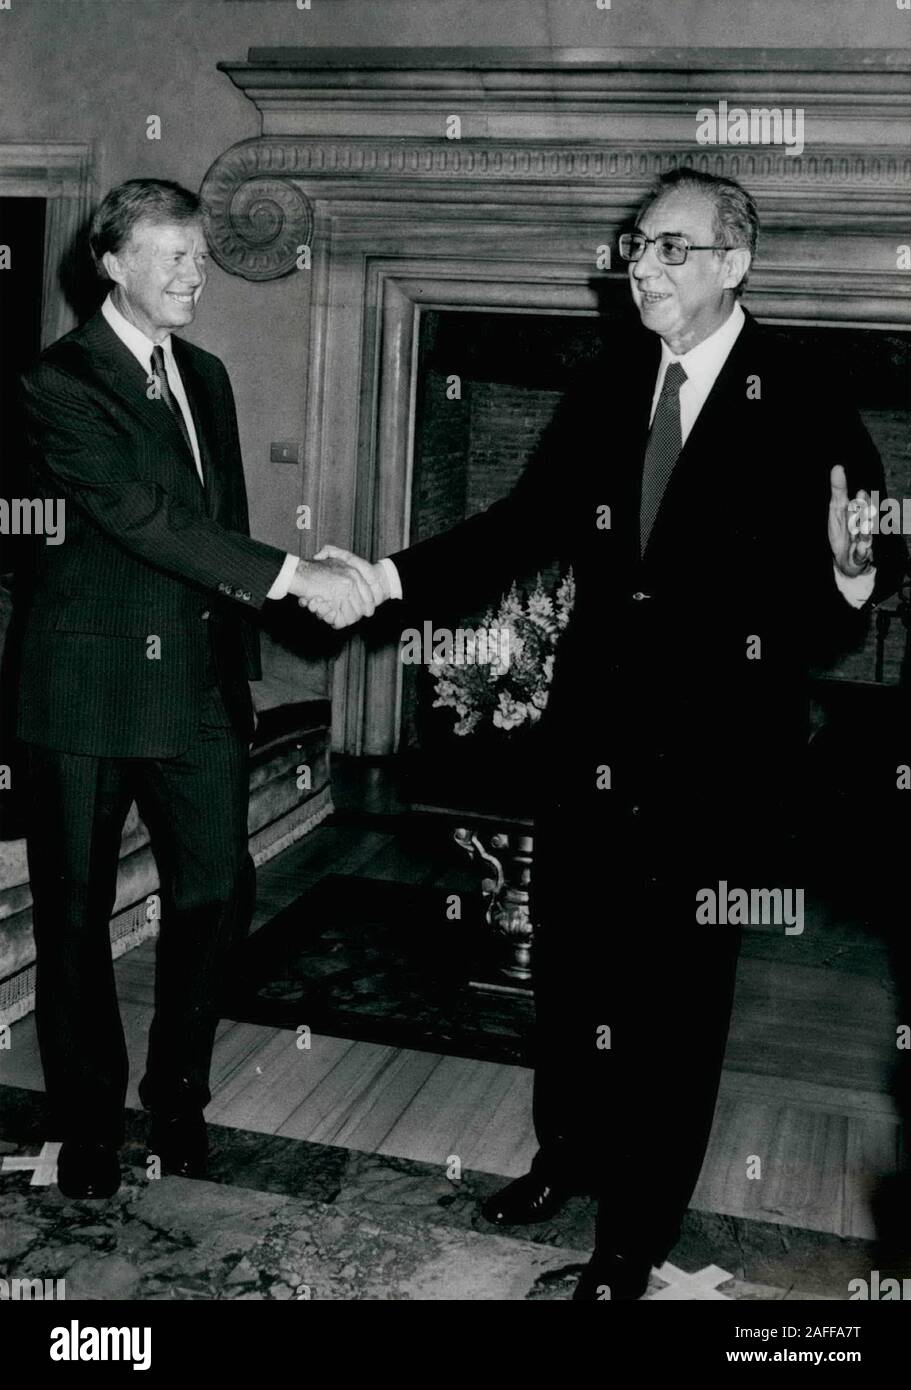 Rome, Italy. 20th June, 1980. President JIMMY CARTER shakes hands when he is greeted by Italian Prime Minister FRANCESCO COSSIGA at his official residence, Villa Madama, in Rome. Credit: Keystone Pictures USA/ZUMAPRESS.com/Alamy Live News Stock Photo